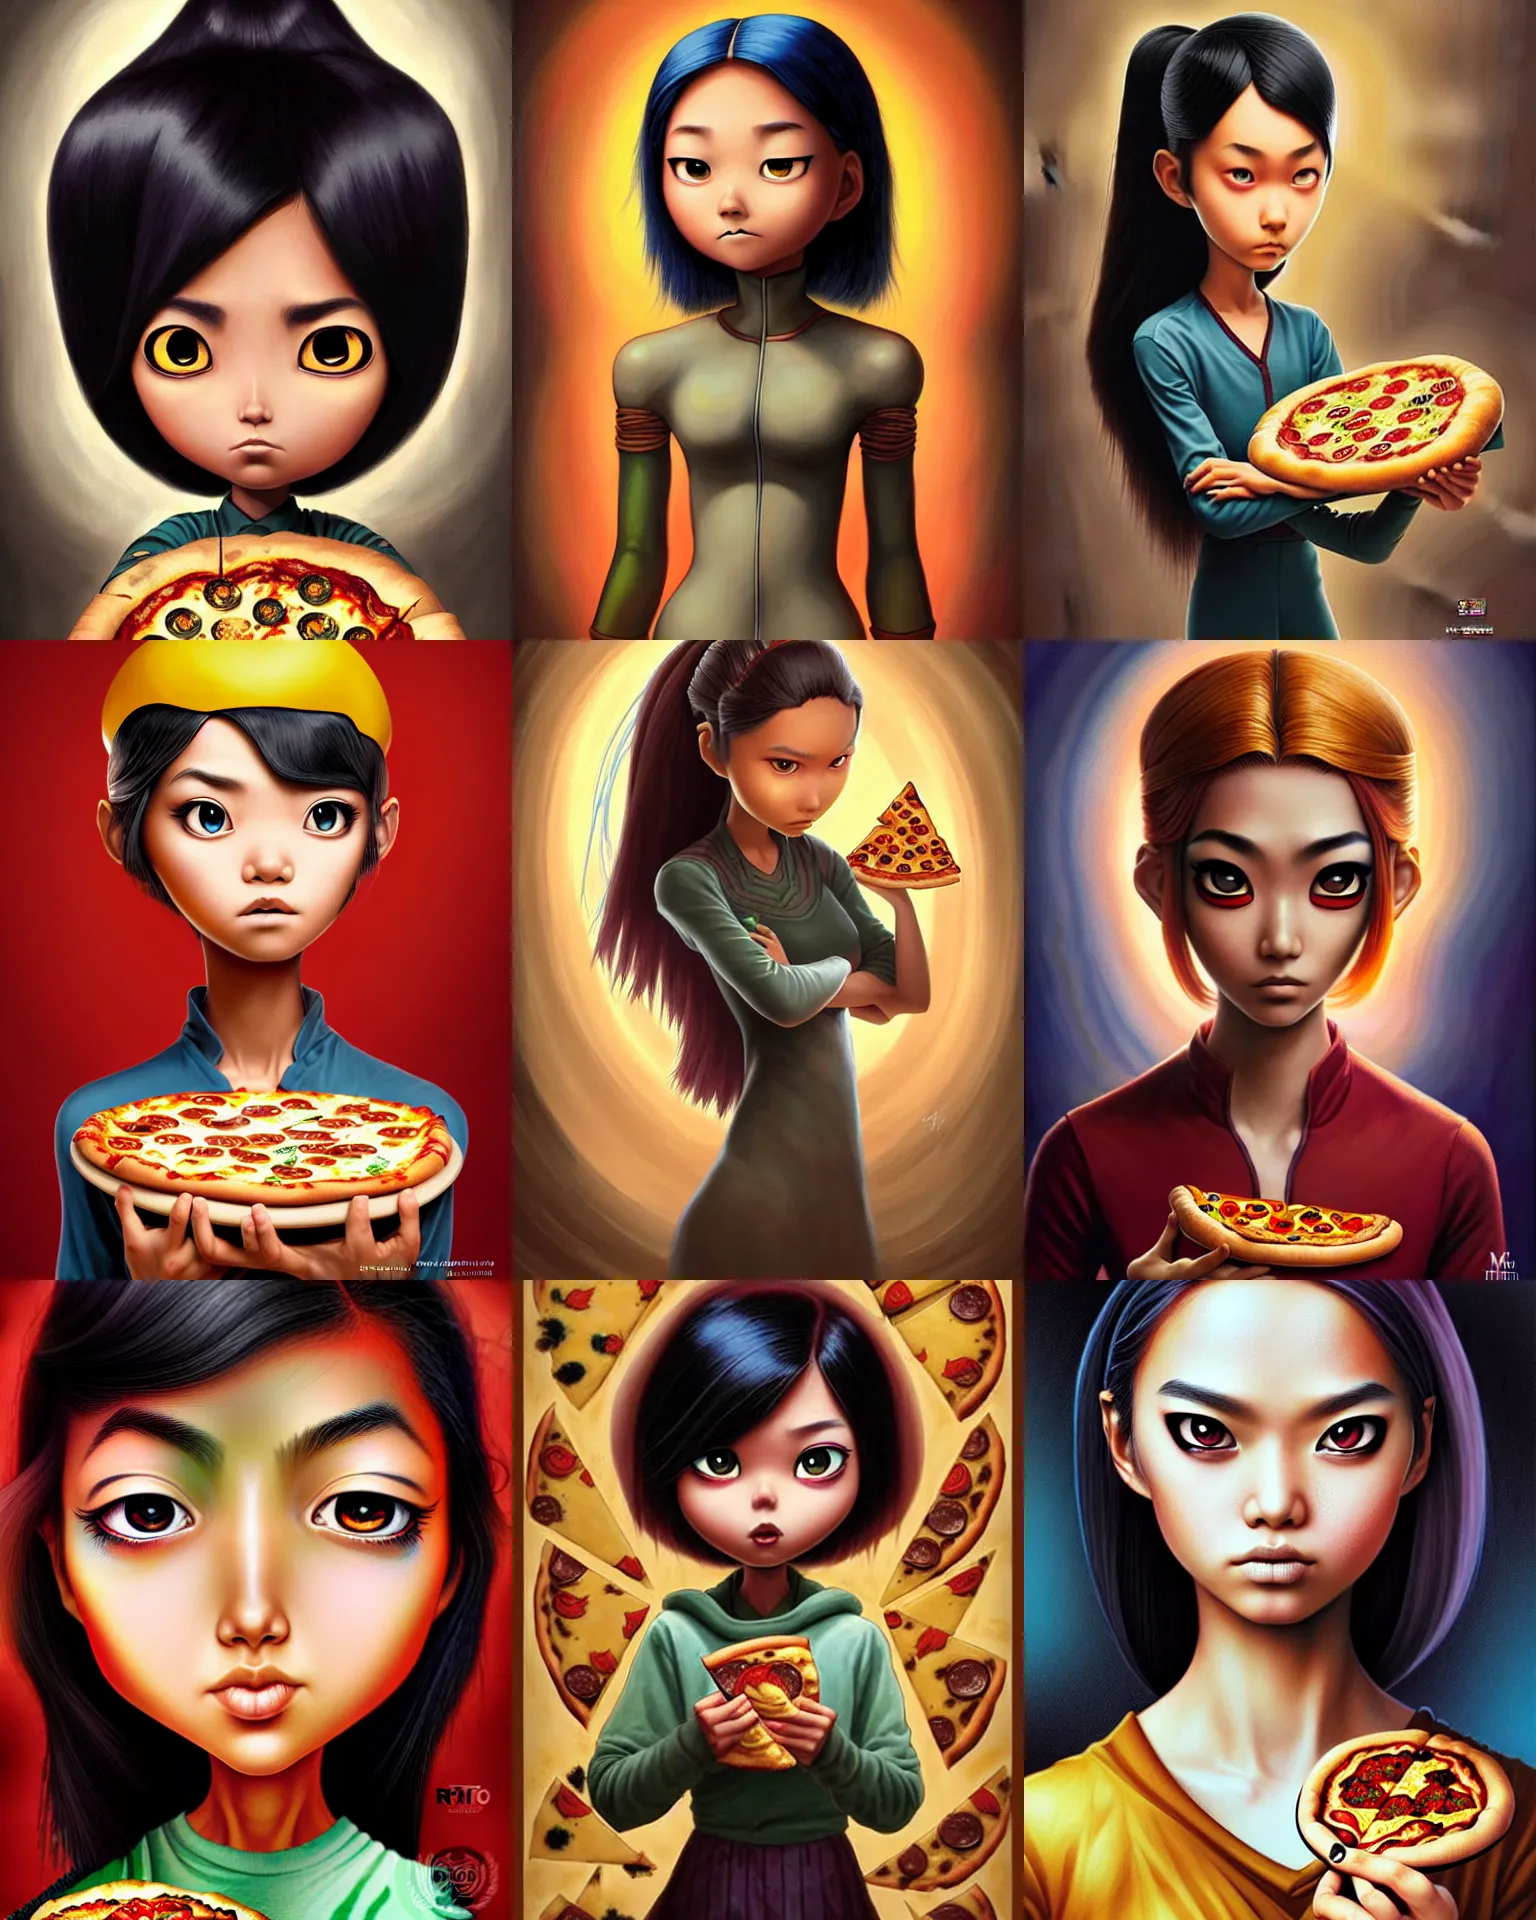 Prompt: an epic fantasy comic book style portrait painting of a young malaysian woman, pizza baker, cheese, expressive, dark piercing eyes, tan skin, beautiful futuristic hair style, awesome pose, character design by mark ryden pixar hayao miyazaki, ue 5